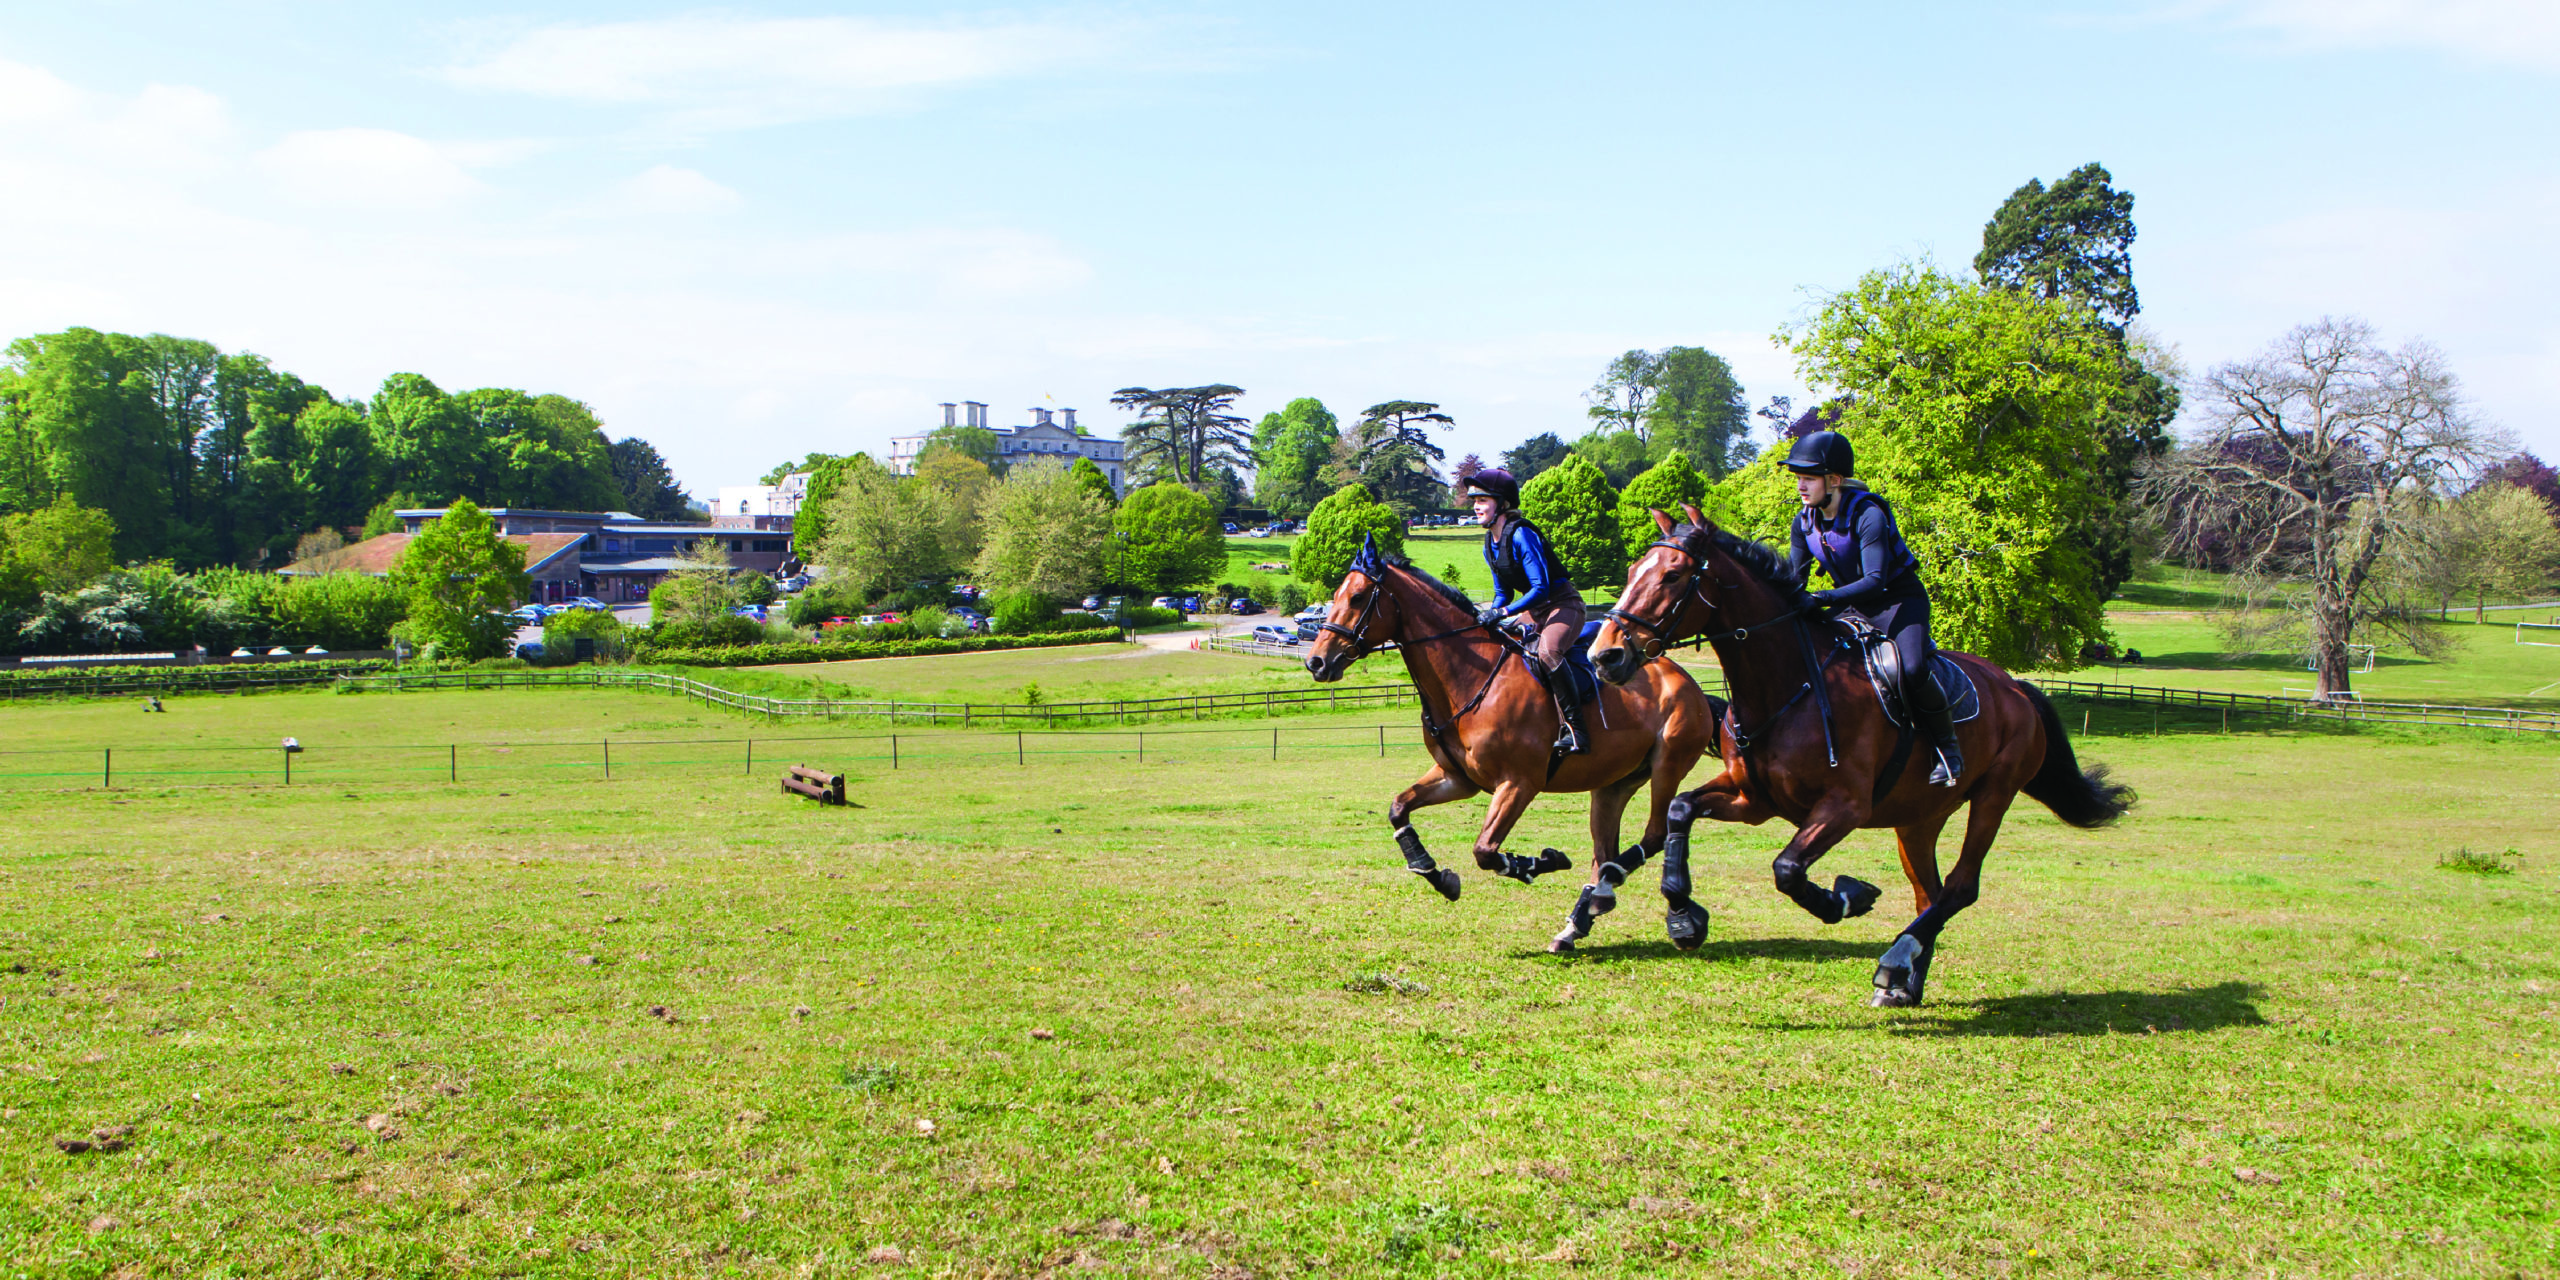 Two Equine students riding across field, with the Main House in the background